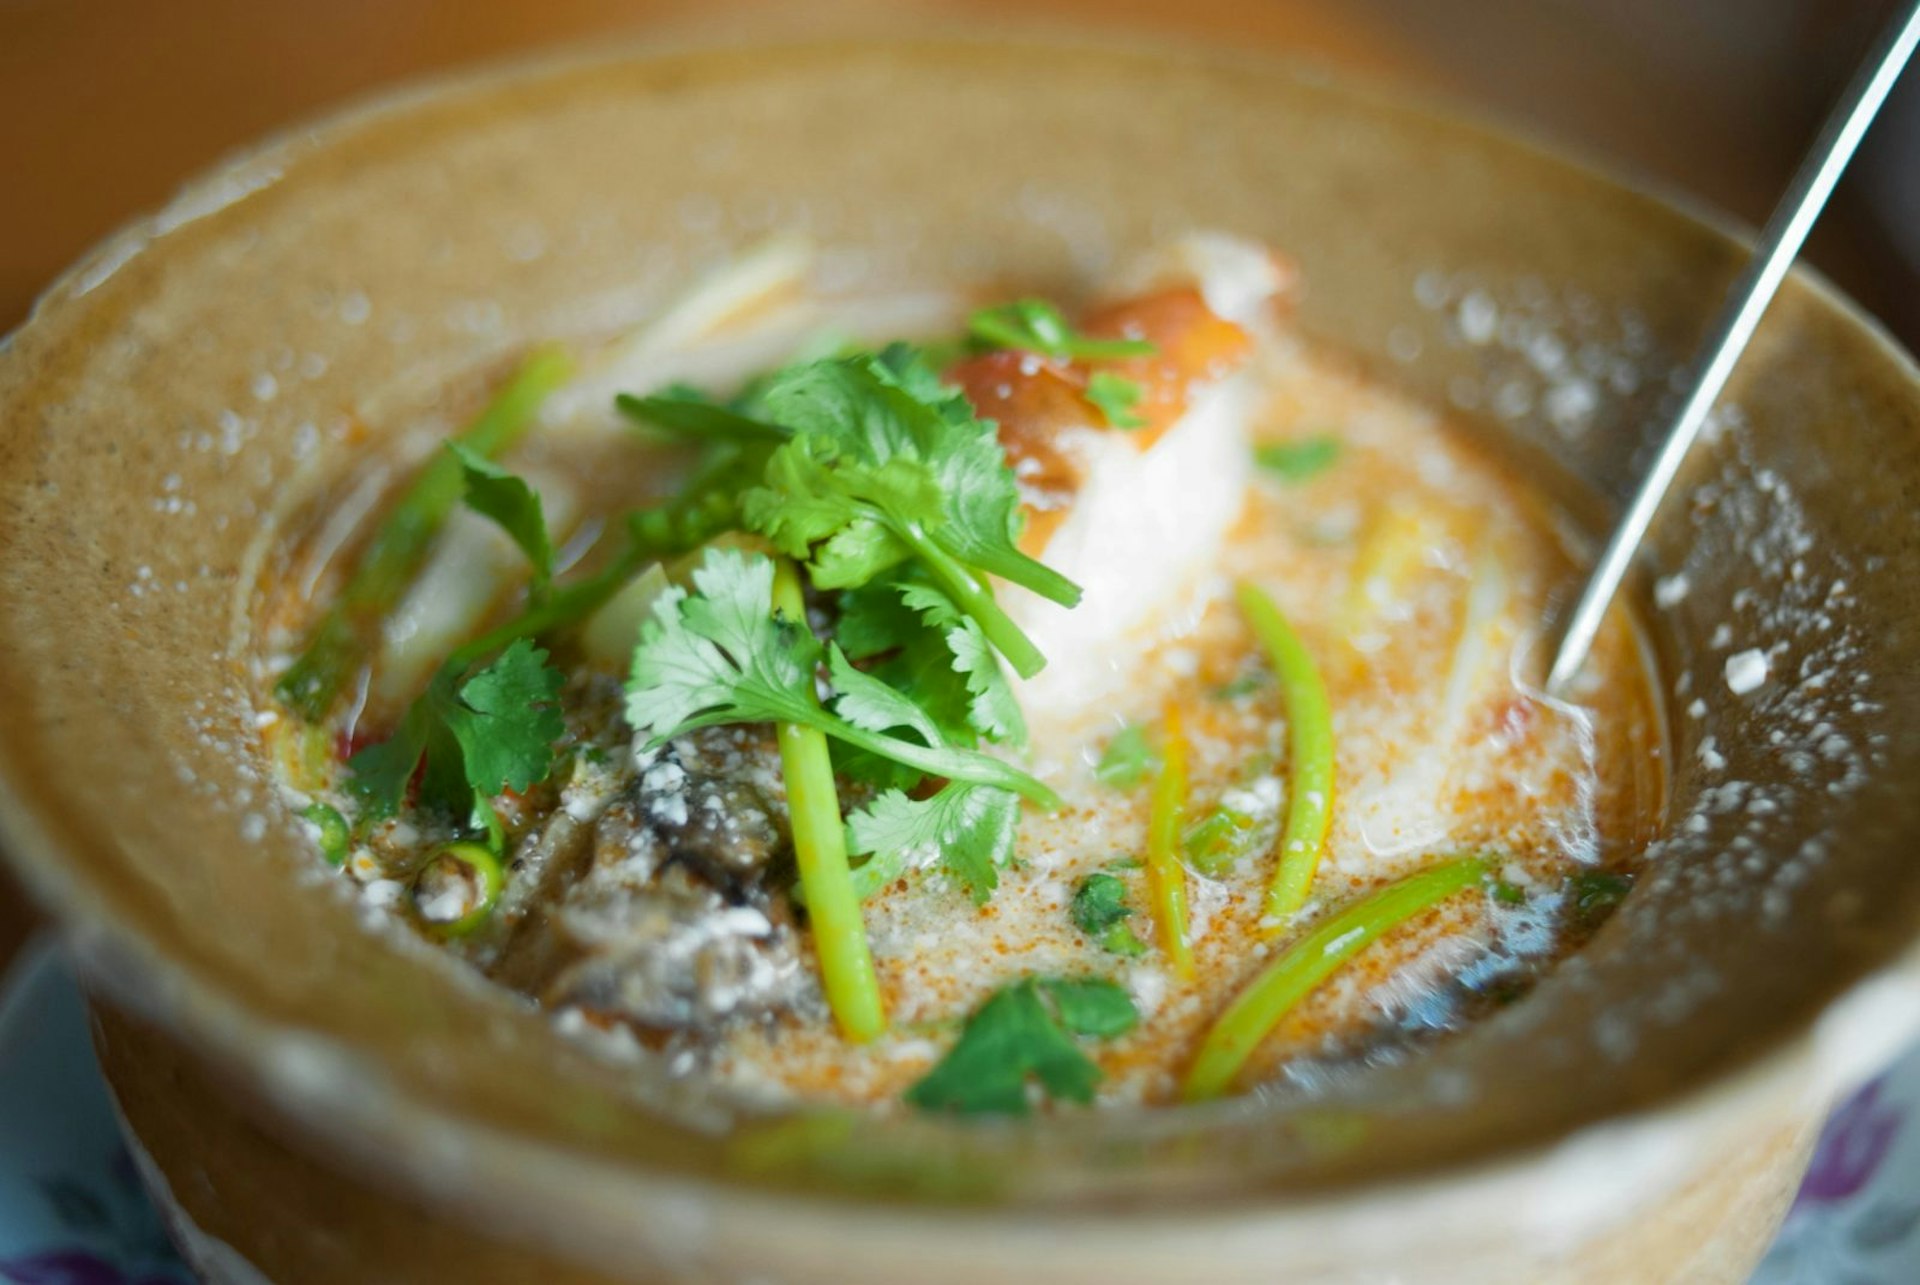 A bowl of sour/spicy tom yam, a Thai-style soup © Austin Bush / Lonely Planet